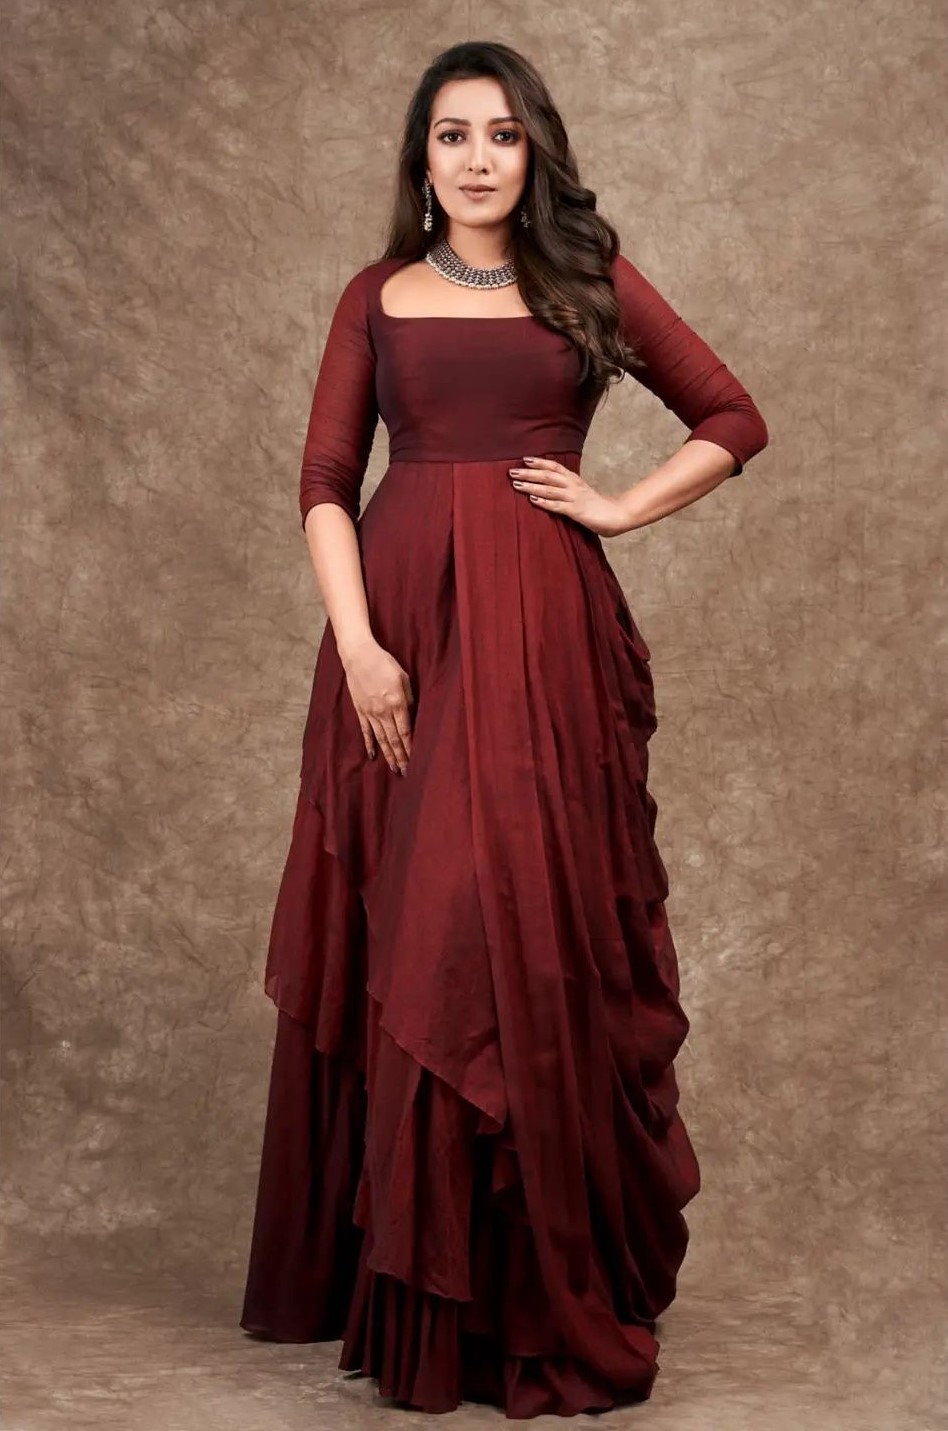 Catherine Tresa In Maroon Gown Stylish Outfits Look